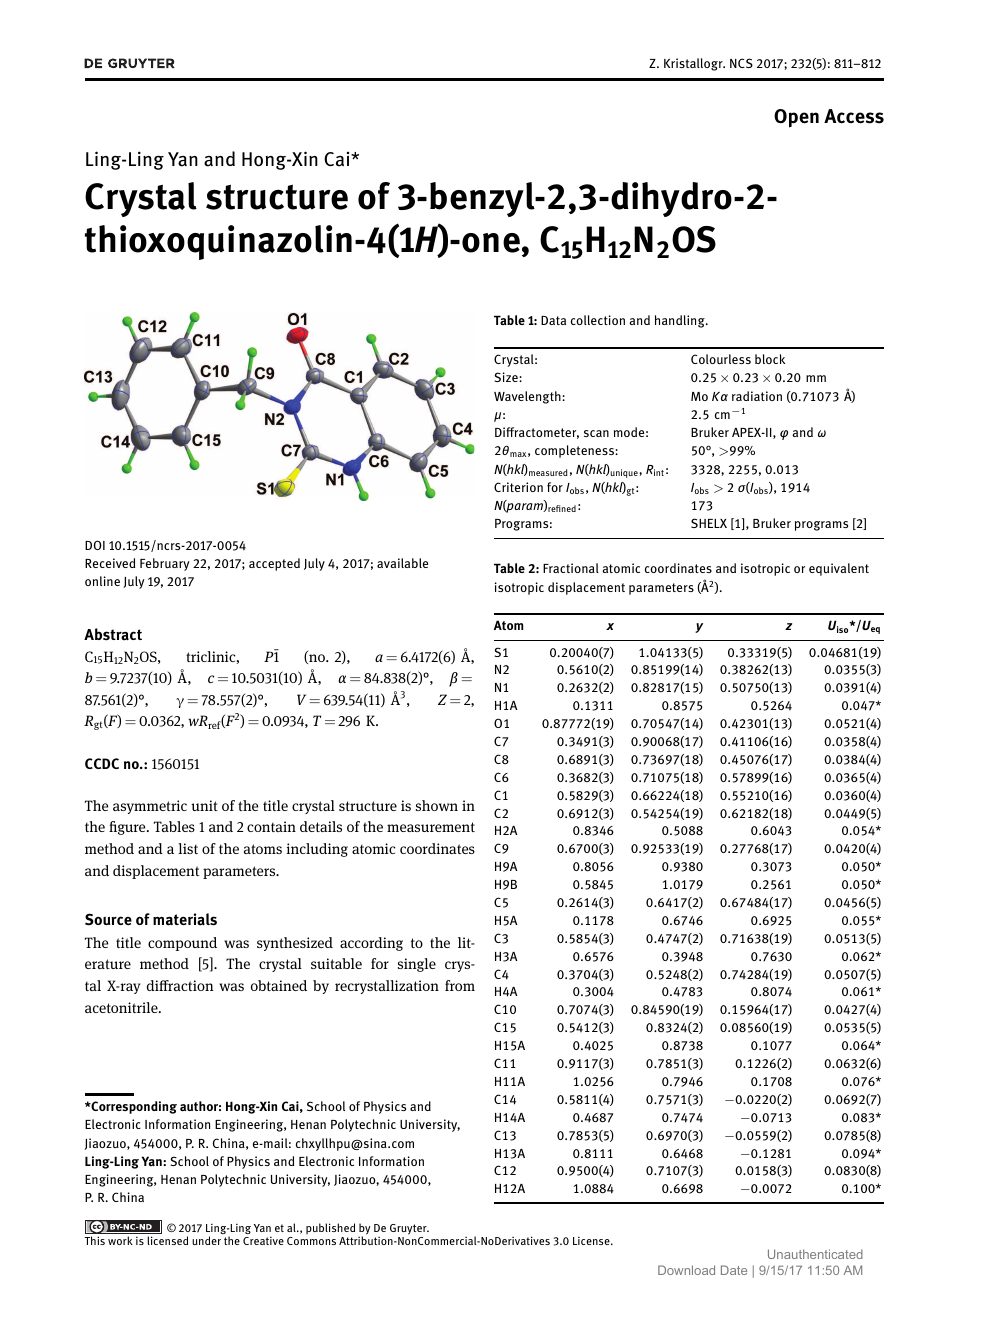 Crystal Structure Of 3 Benzyl 2 3 Dihydro 2 Thioxoquinazolin 4 1h One C15h12n2os Topic Of Research Paper In Chemical Sciences Download Scholarly Article Pdf And Read For Free On Cyberleninka Open Science Hub